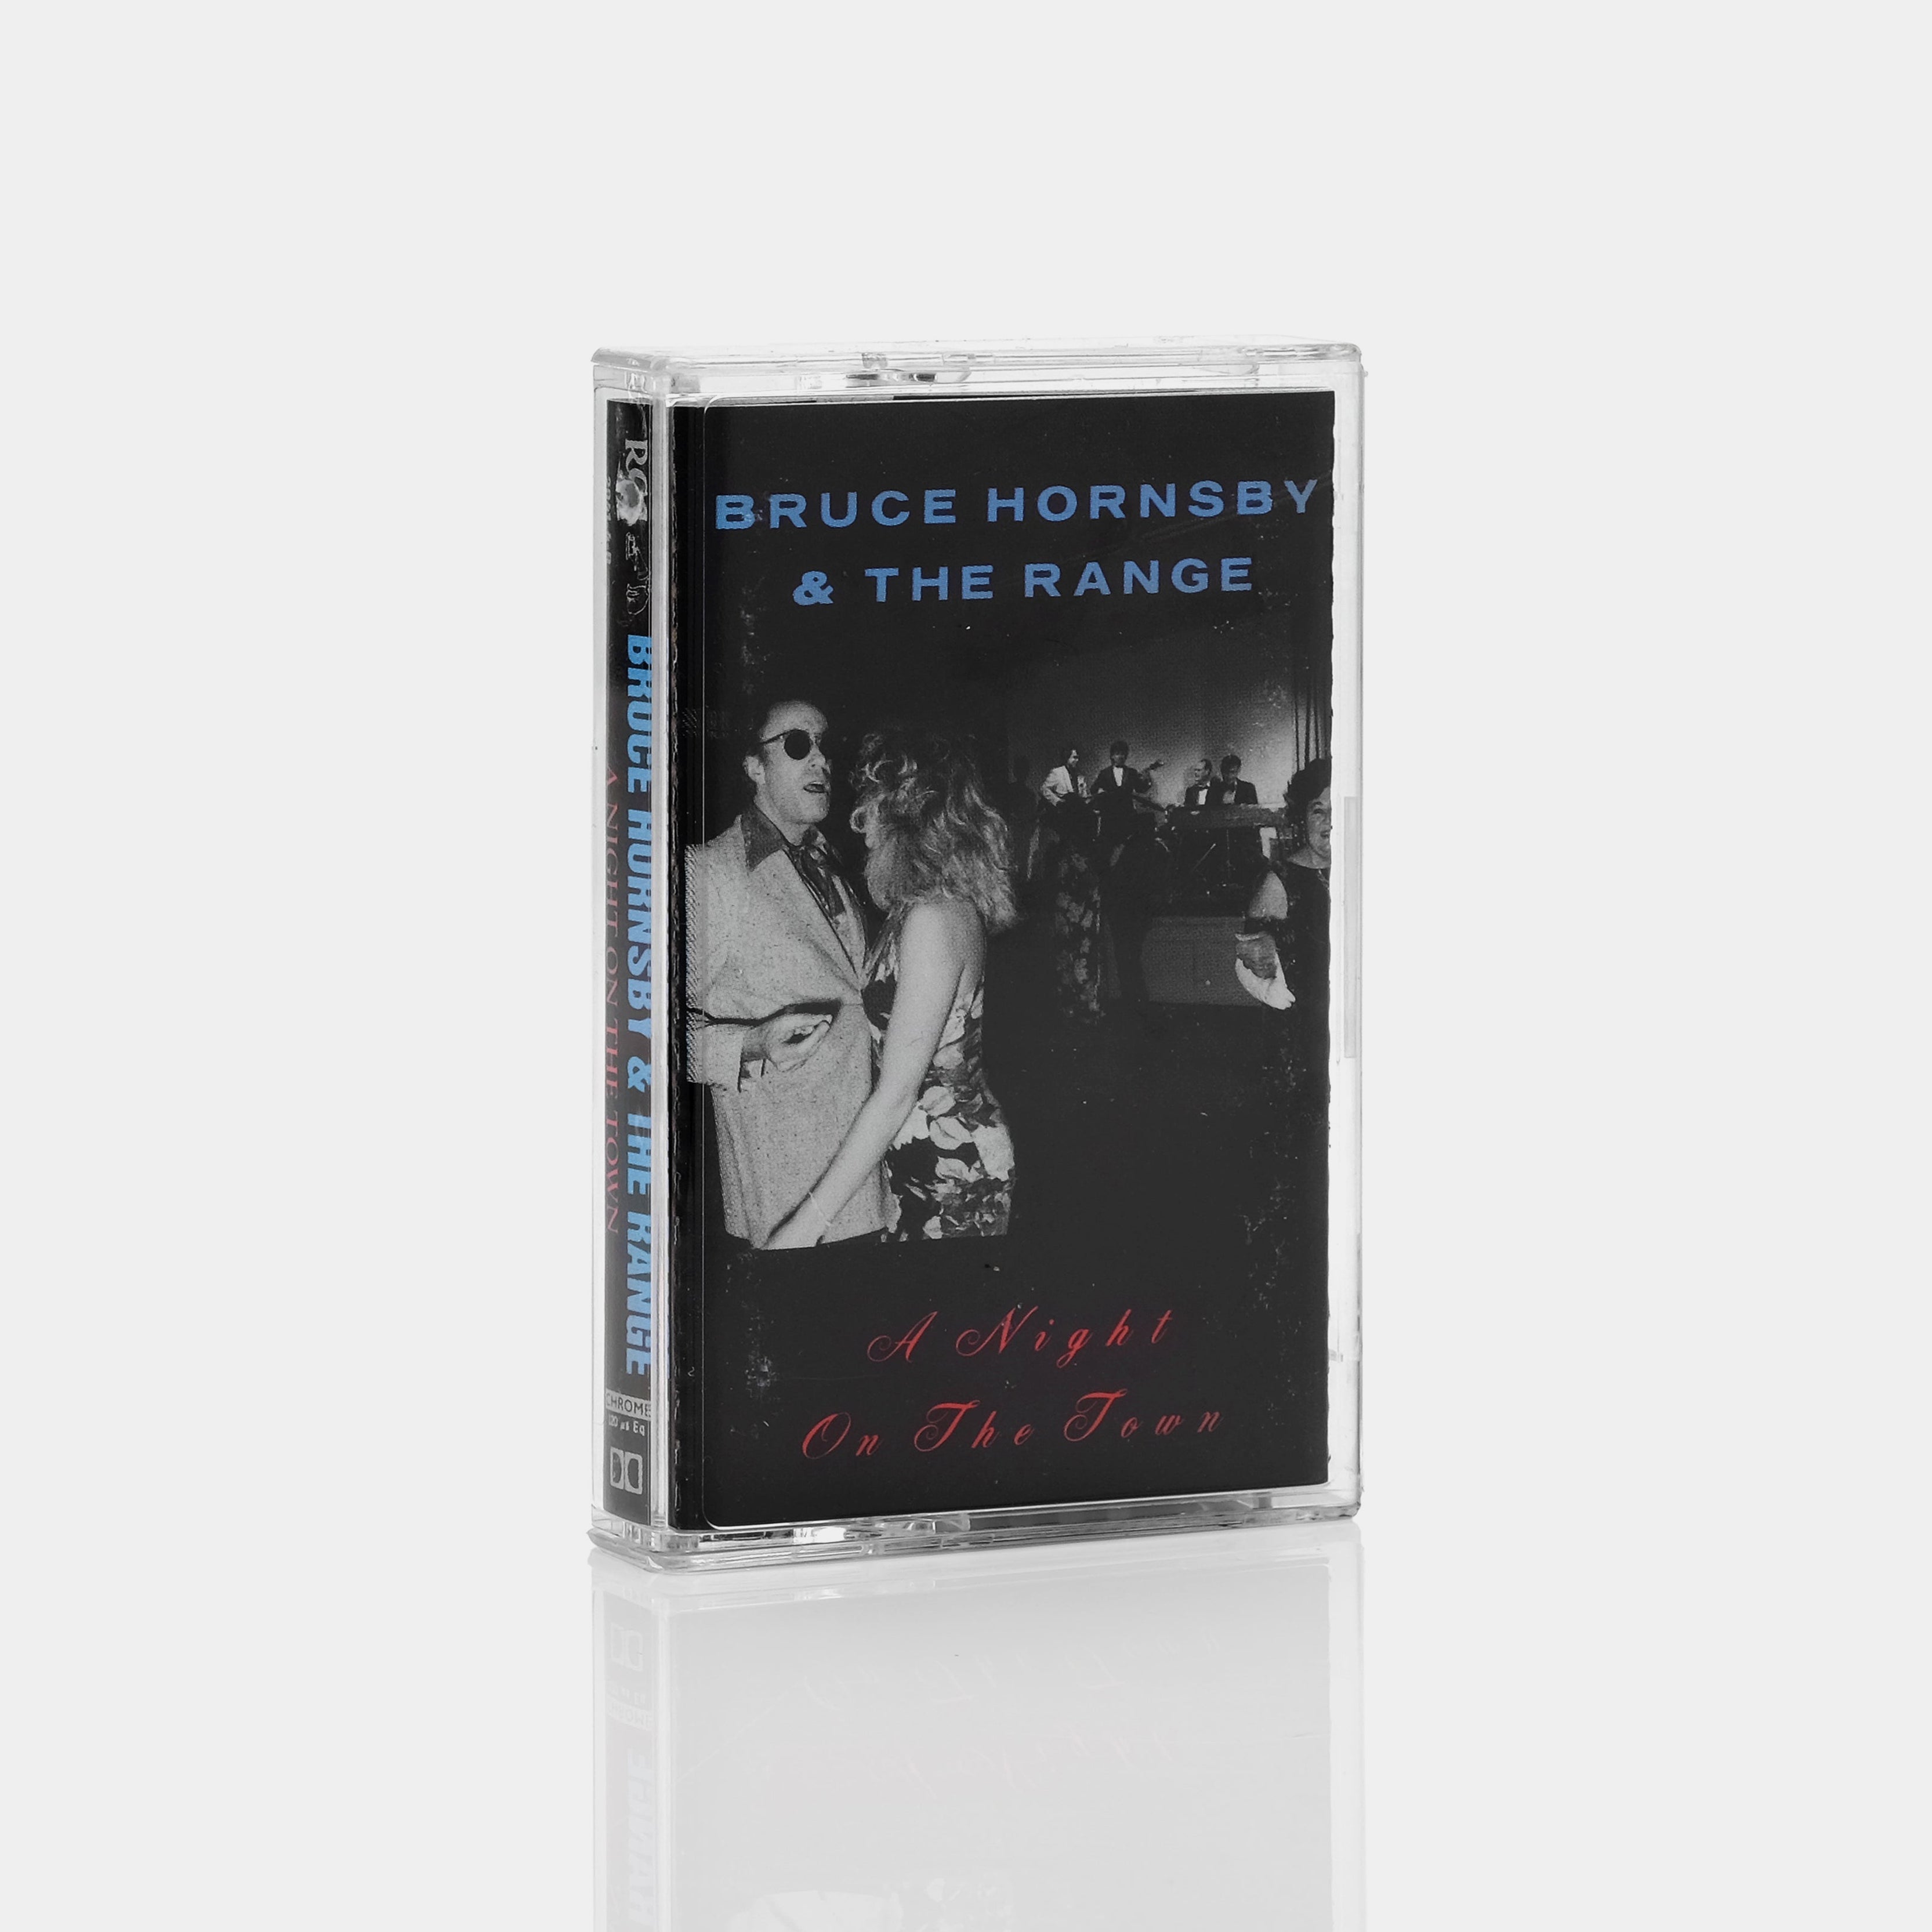 Bruce Hornsby & The Range - Night On The Town Cassette Tape